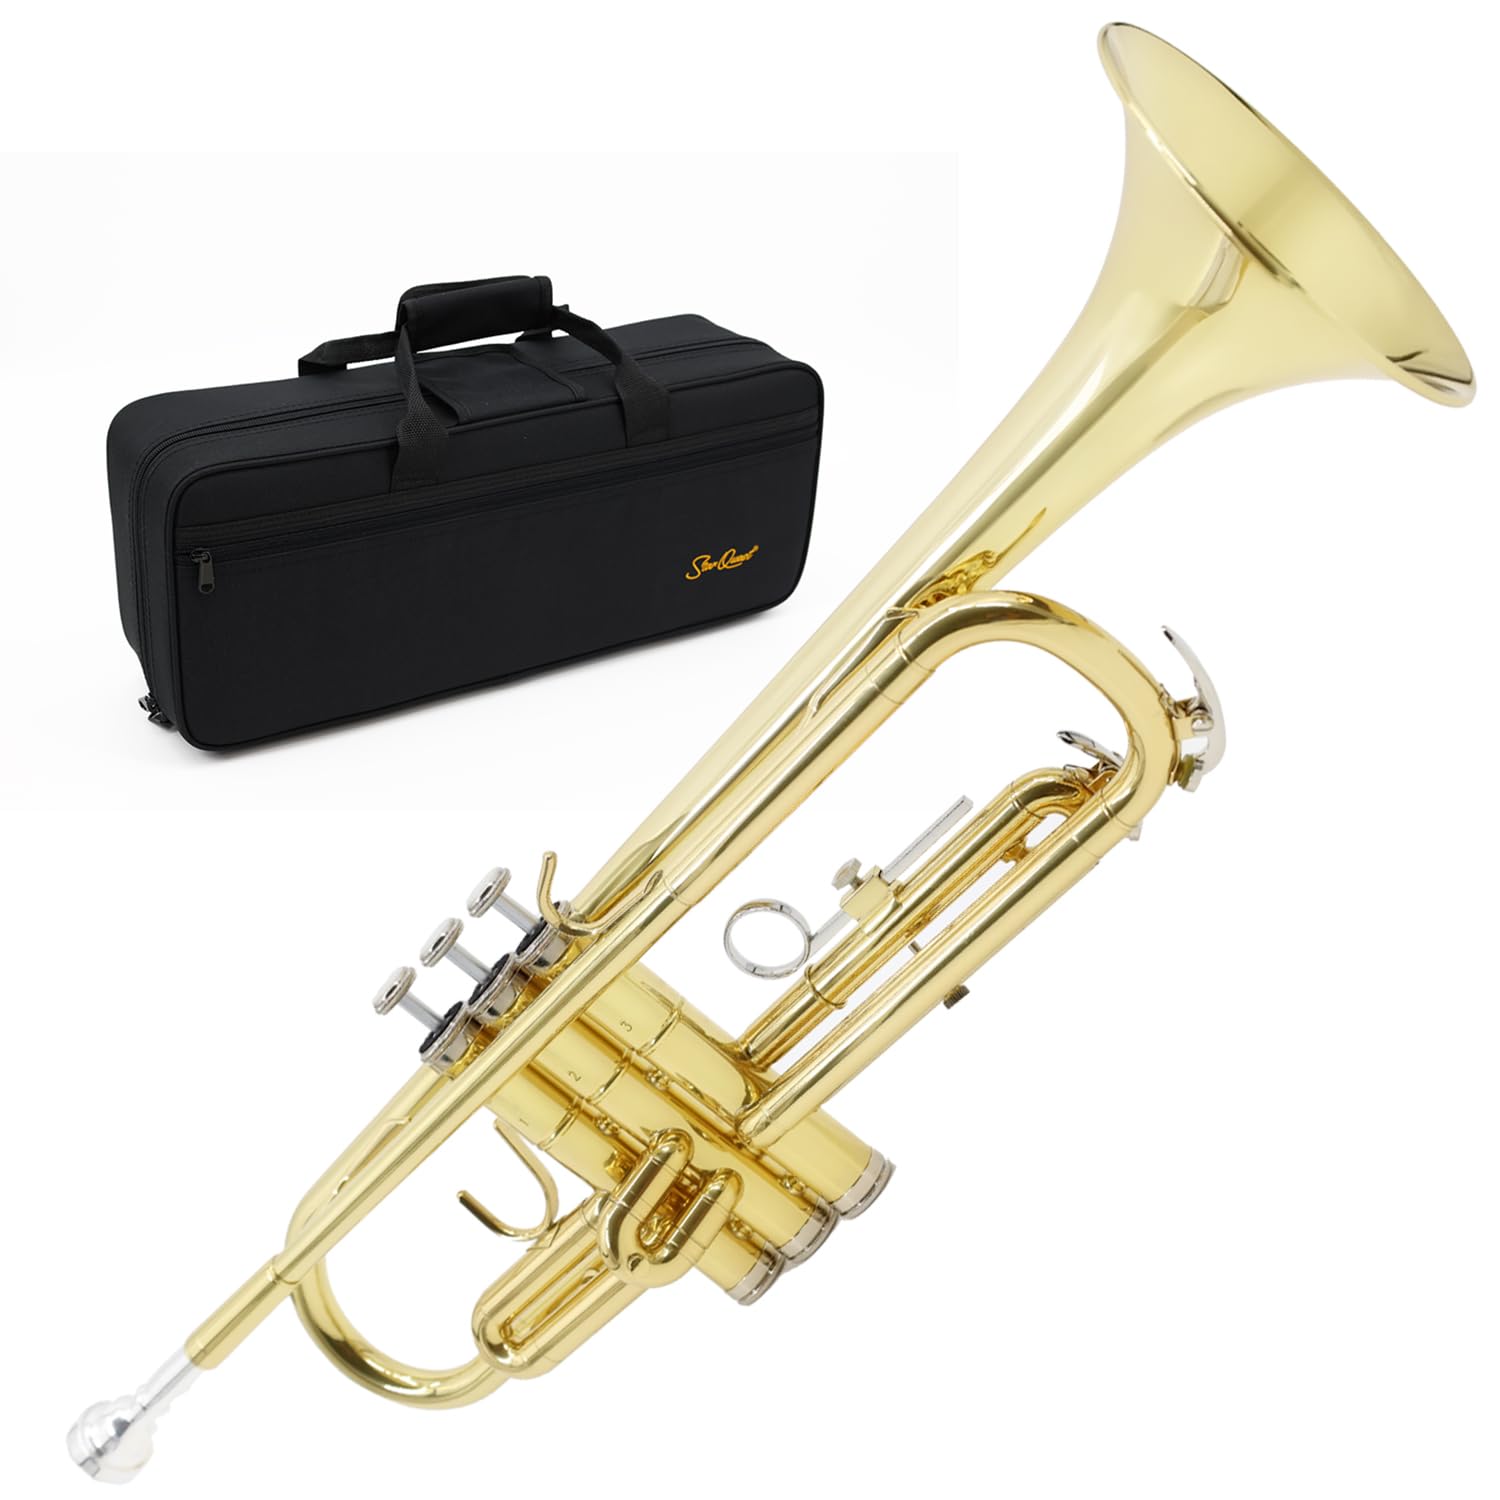 StarQuest TR250 Trumpet .460” Bore - High-Precision Nickel-Plated Valves, Ideal for Students and Experienced Musicians, Complete with Case & Accessories